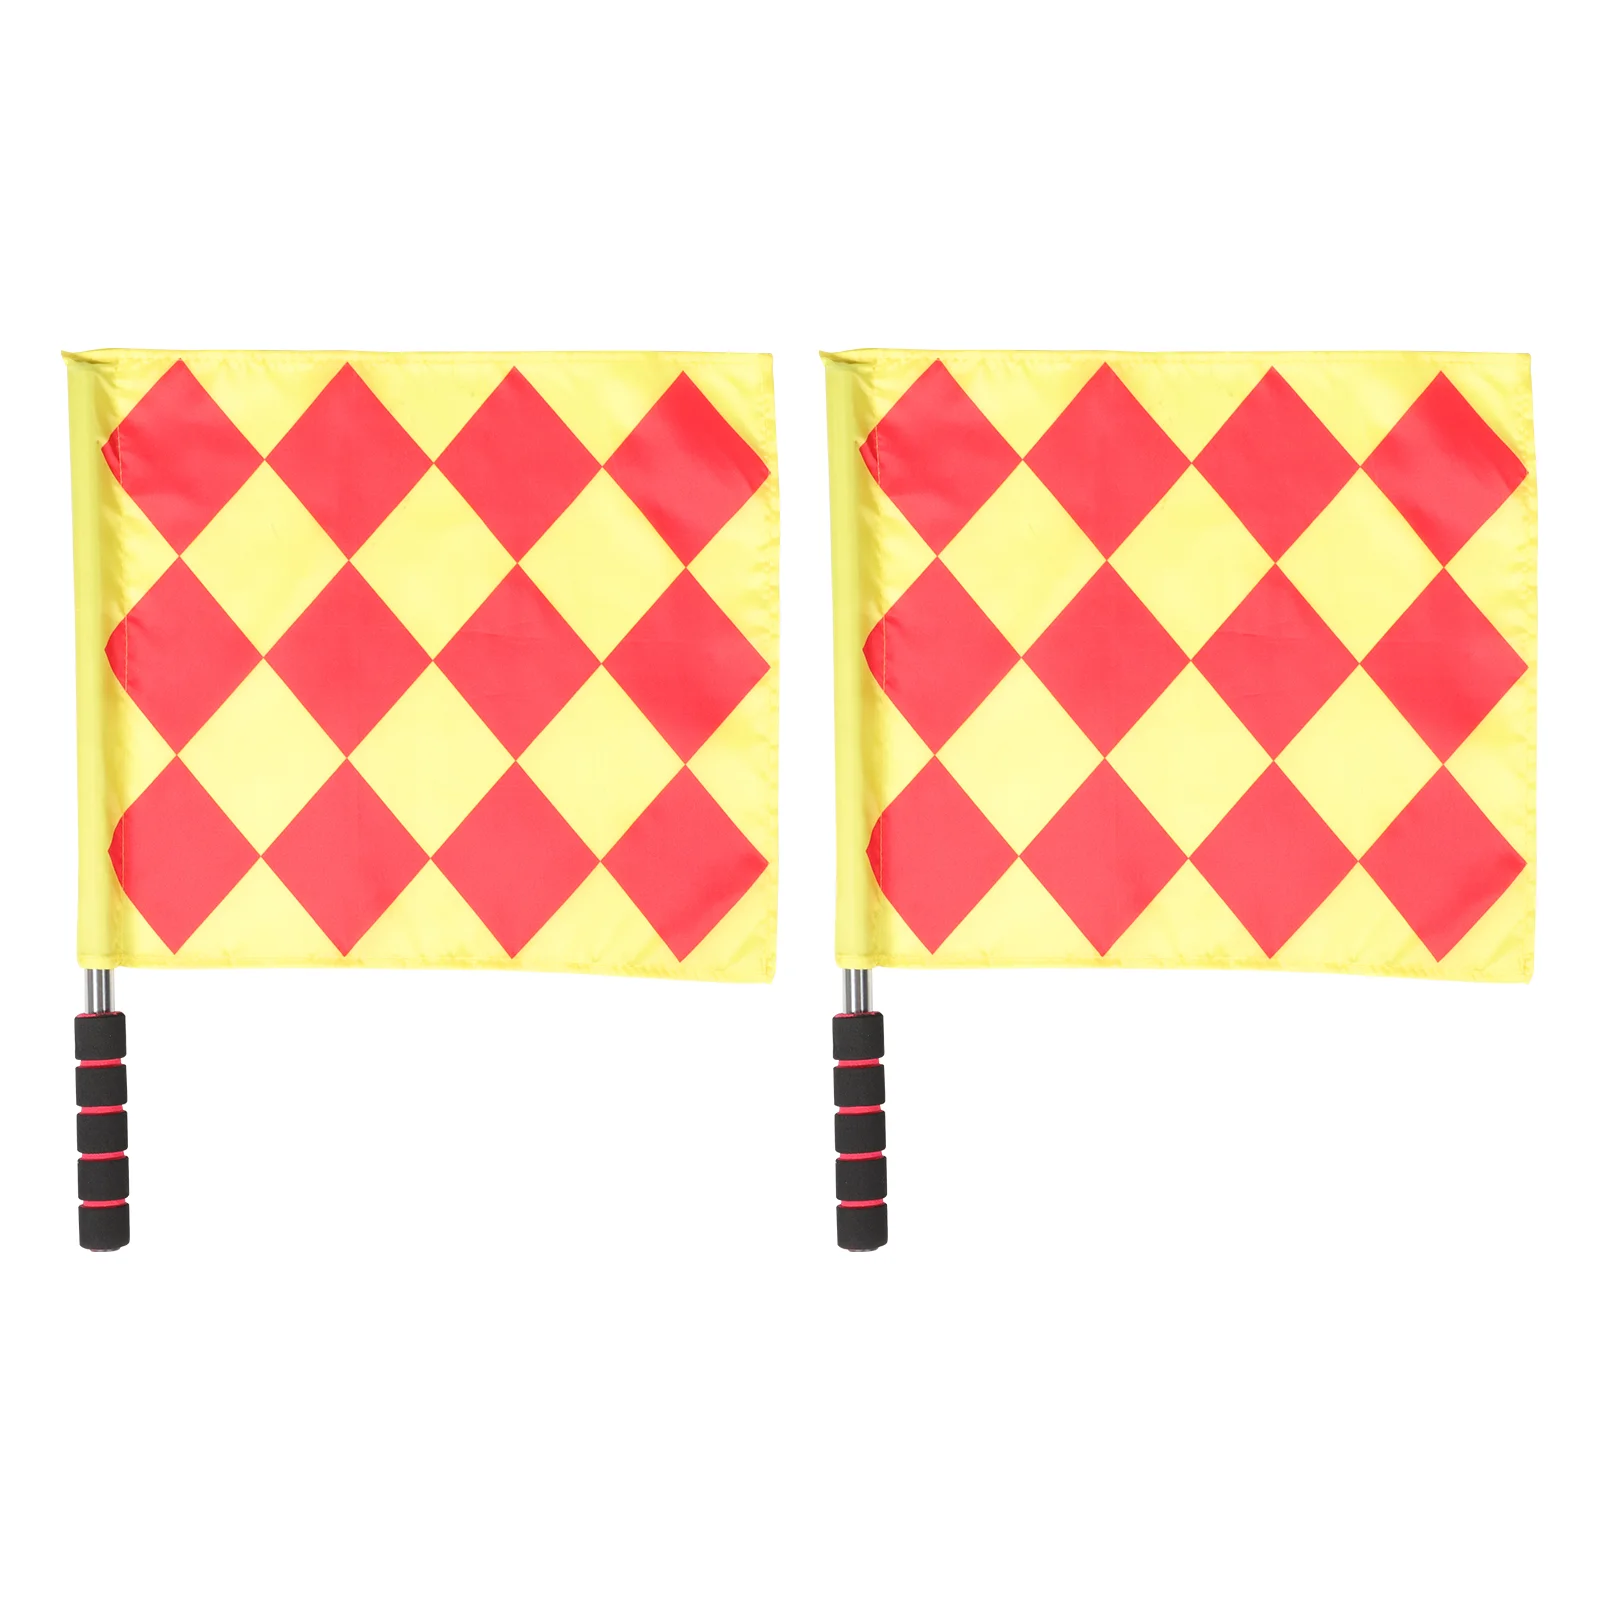 

Flag Referee Flags Sports Football Linesman Training Flags Soccer Patrol Penalty Match Hand Official Performance Game Athletic